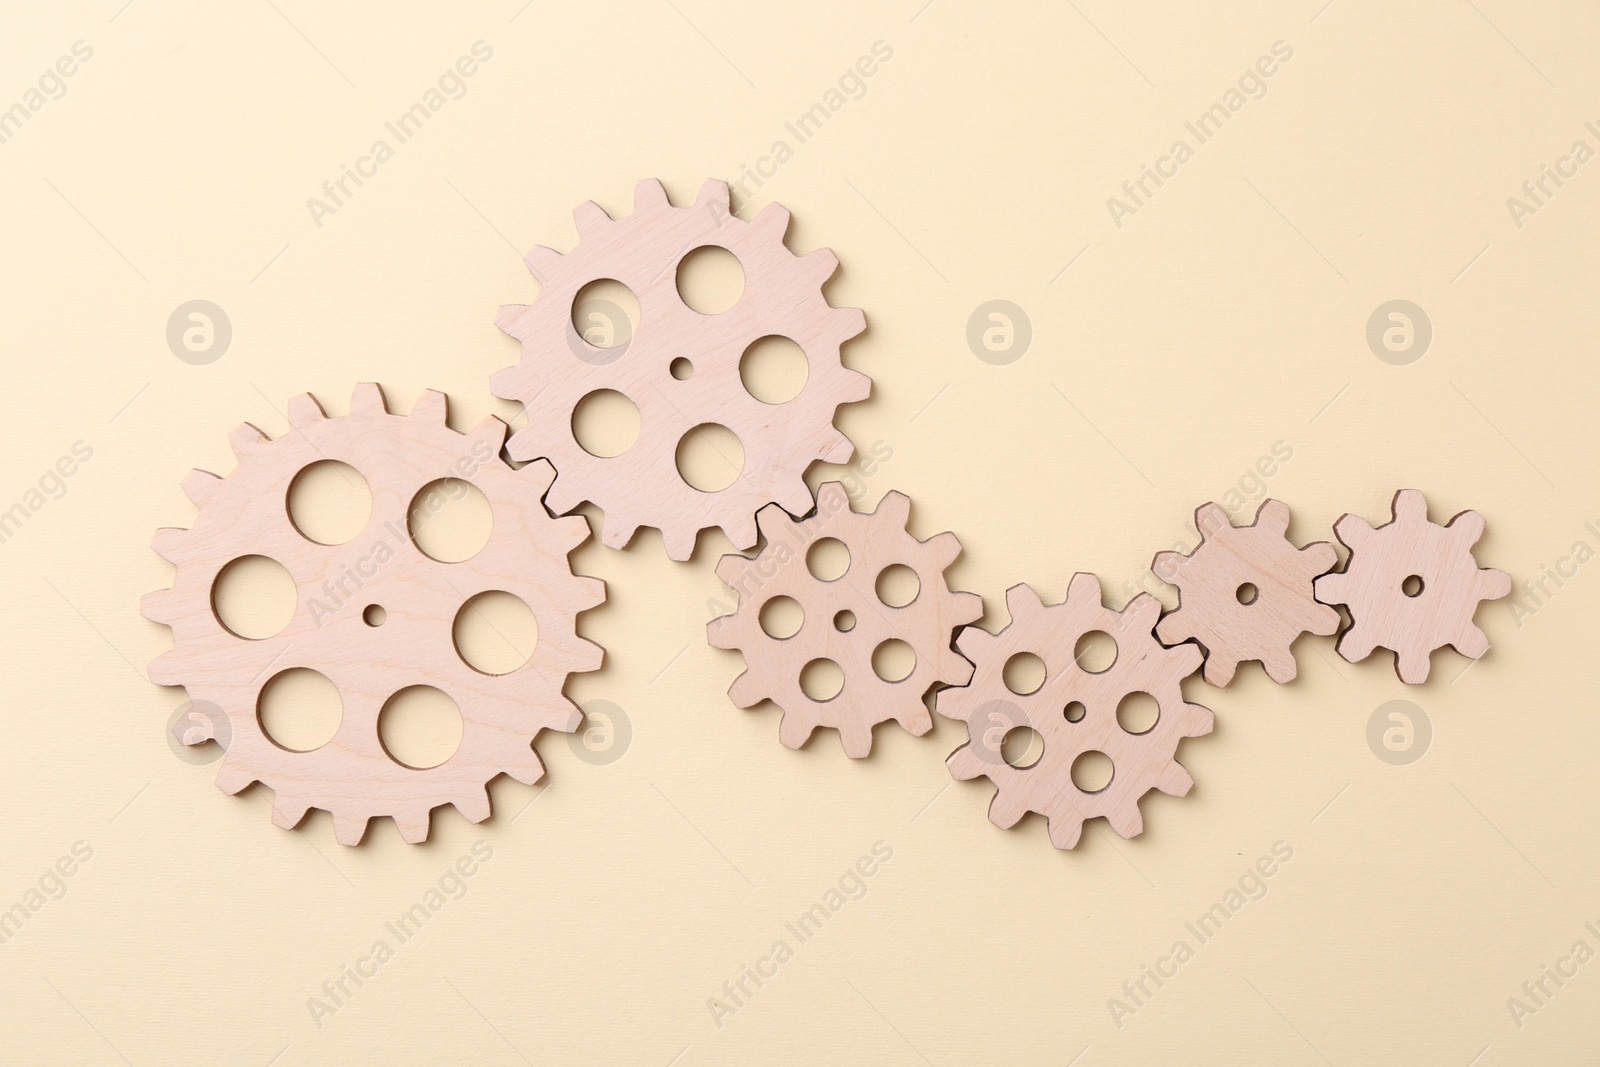 Photo of Business process organization and optimization. Scheme with wooden figures on beige background, top view